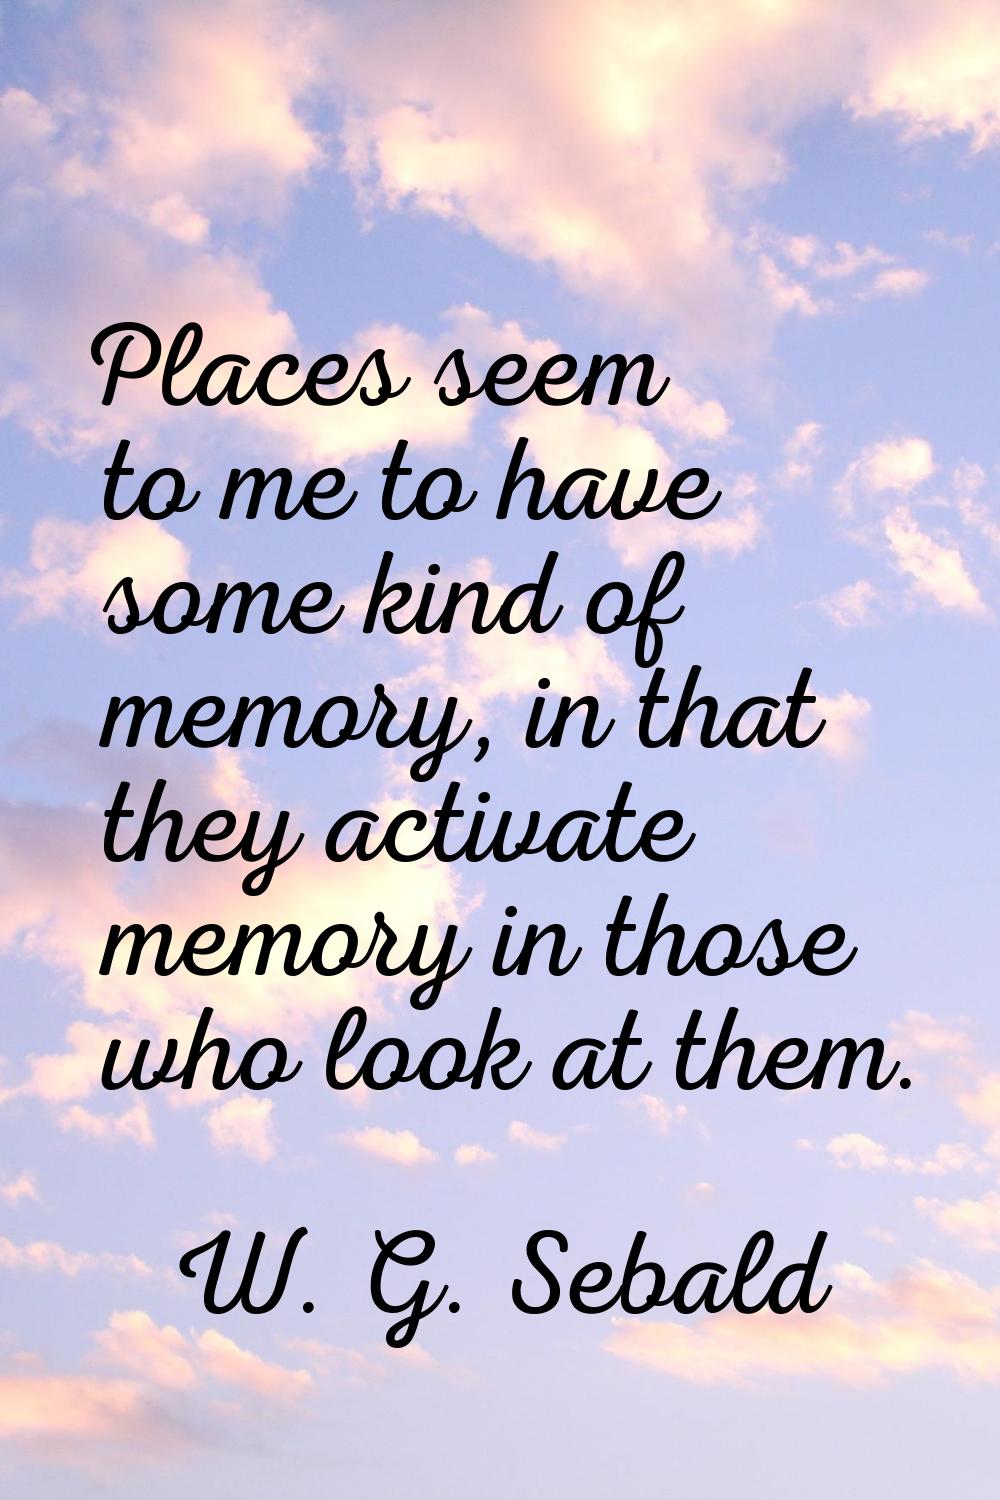 Places seem to me to have some kind of memory, in that they activate memory in those who look at th